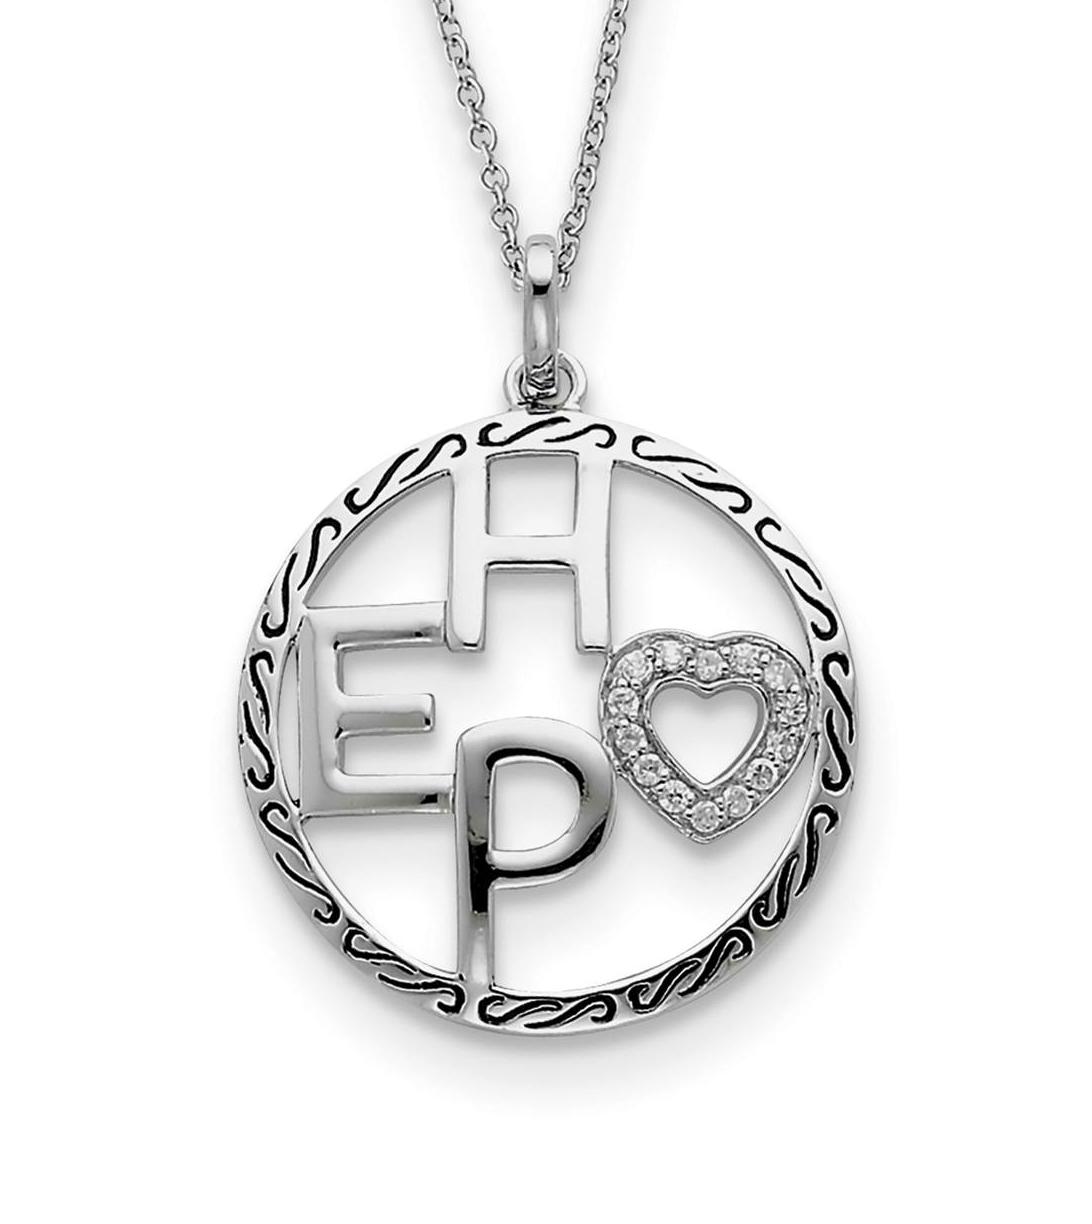 'Hope' CZ Pendant Necklace, Antiqued Rhodium-Plated Sterling Silver, 18